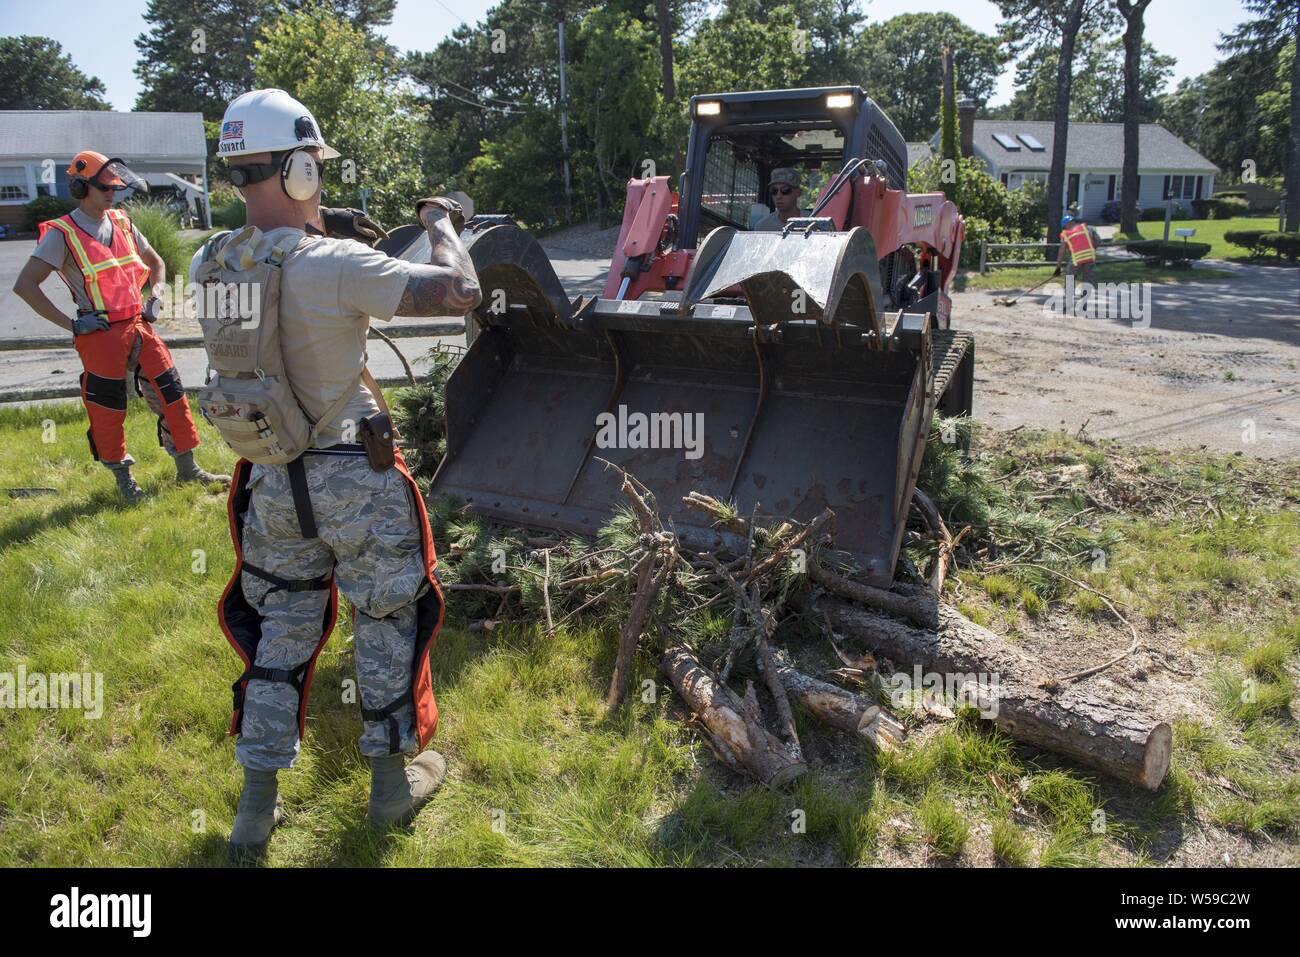 Airmen from the Massachusetts Air National Guard's 102nd Civil Engineer Squadron mobilized to support recovery efforts in the wake of two tornadoes that touched down on Cape Cod on July 23, 2019, July 25, 2019. The Airmen cleared fallen trees and debris from roadways in the towns of Dennis and Harwich Massachusetts. Image courtesy Tech. Sgt. Thomas Swanson/102nd Intelligence Wing. () Stock Photo